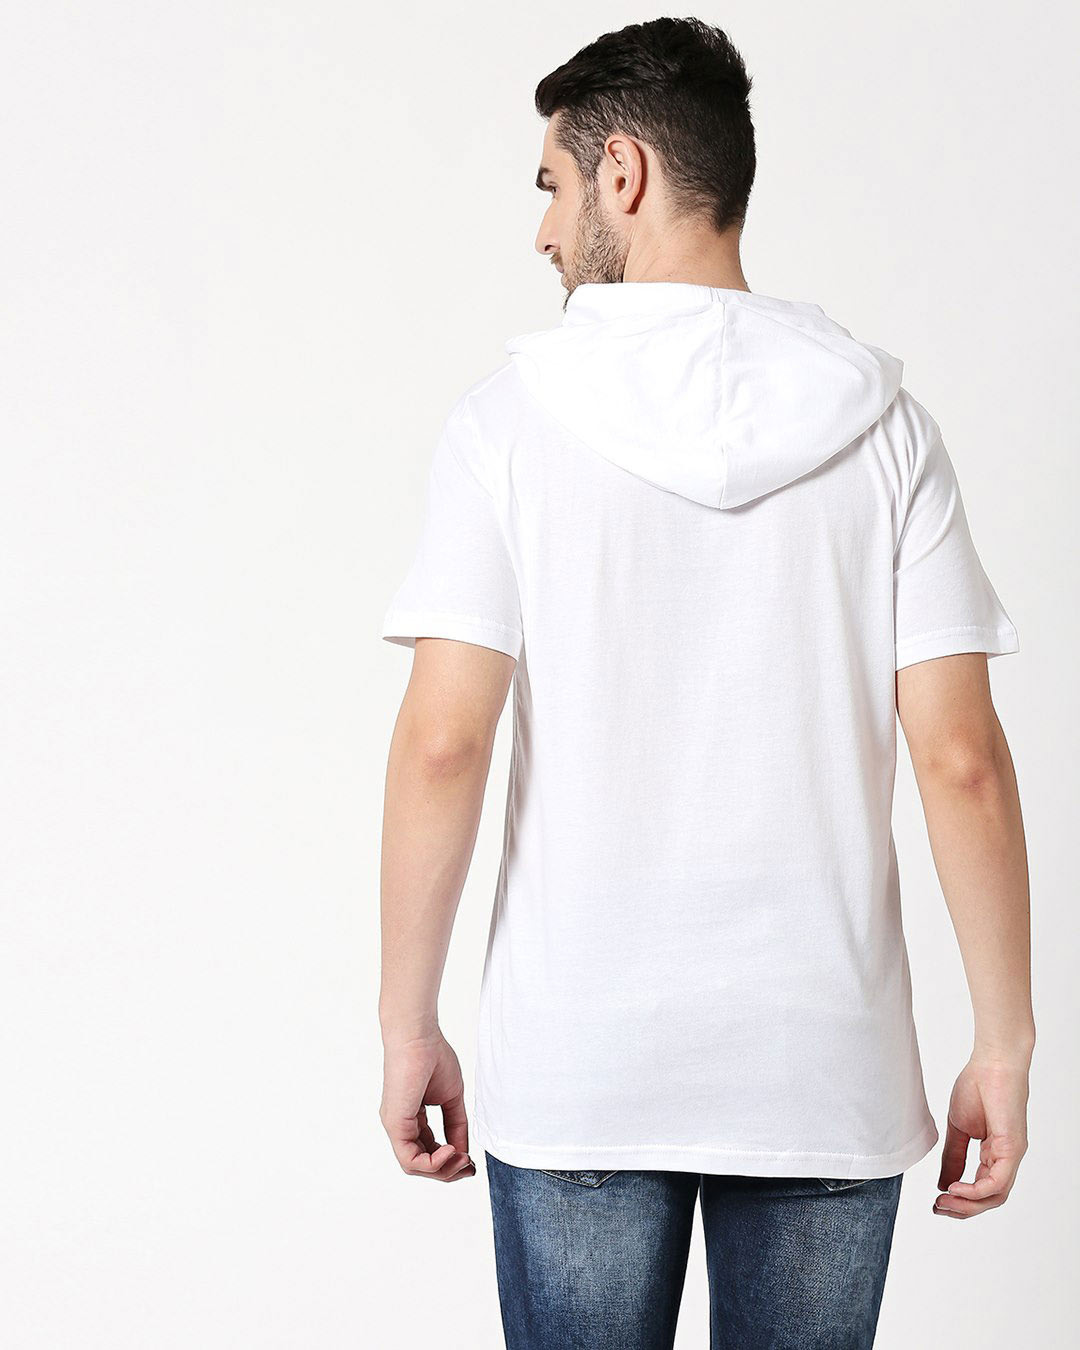 Shop Escape to outdoors Half Sleeve Hoodie T-shirt White-Back